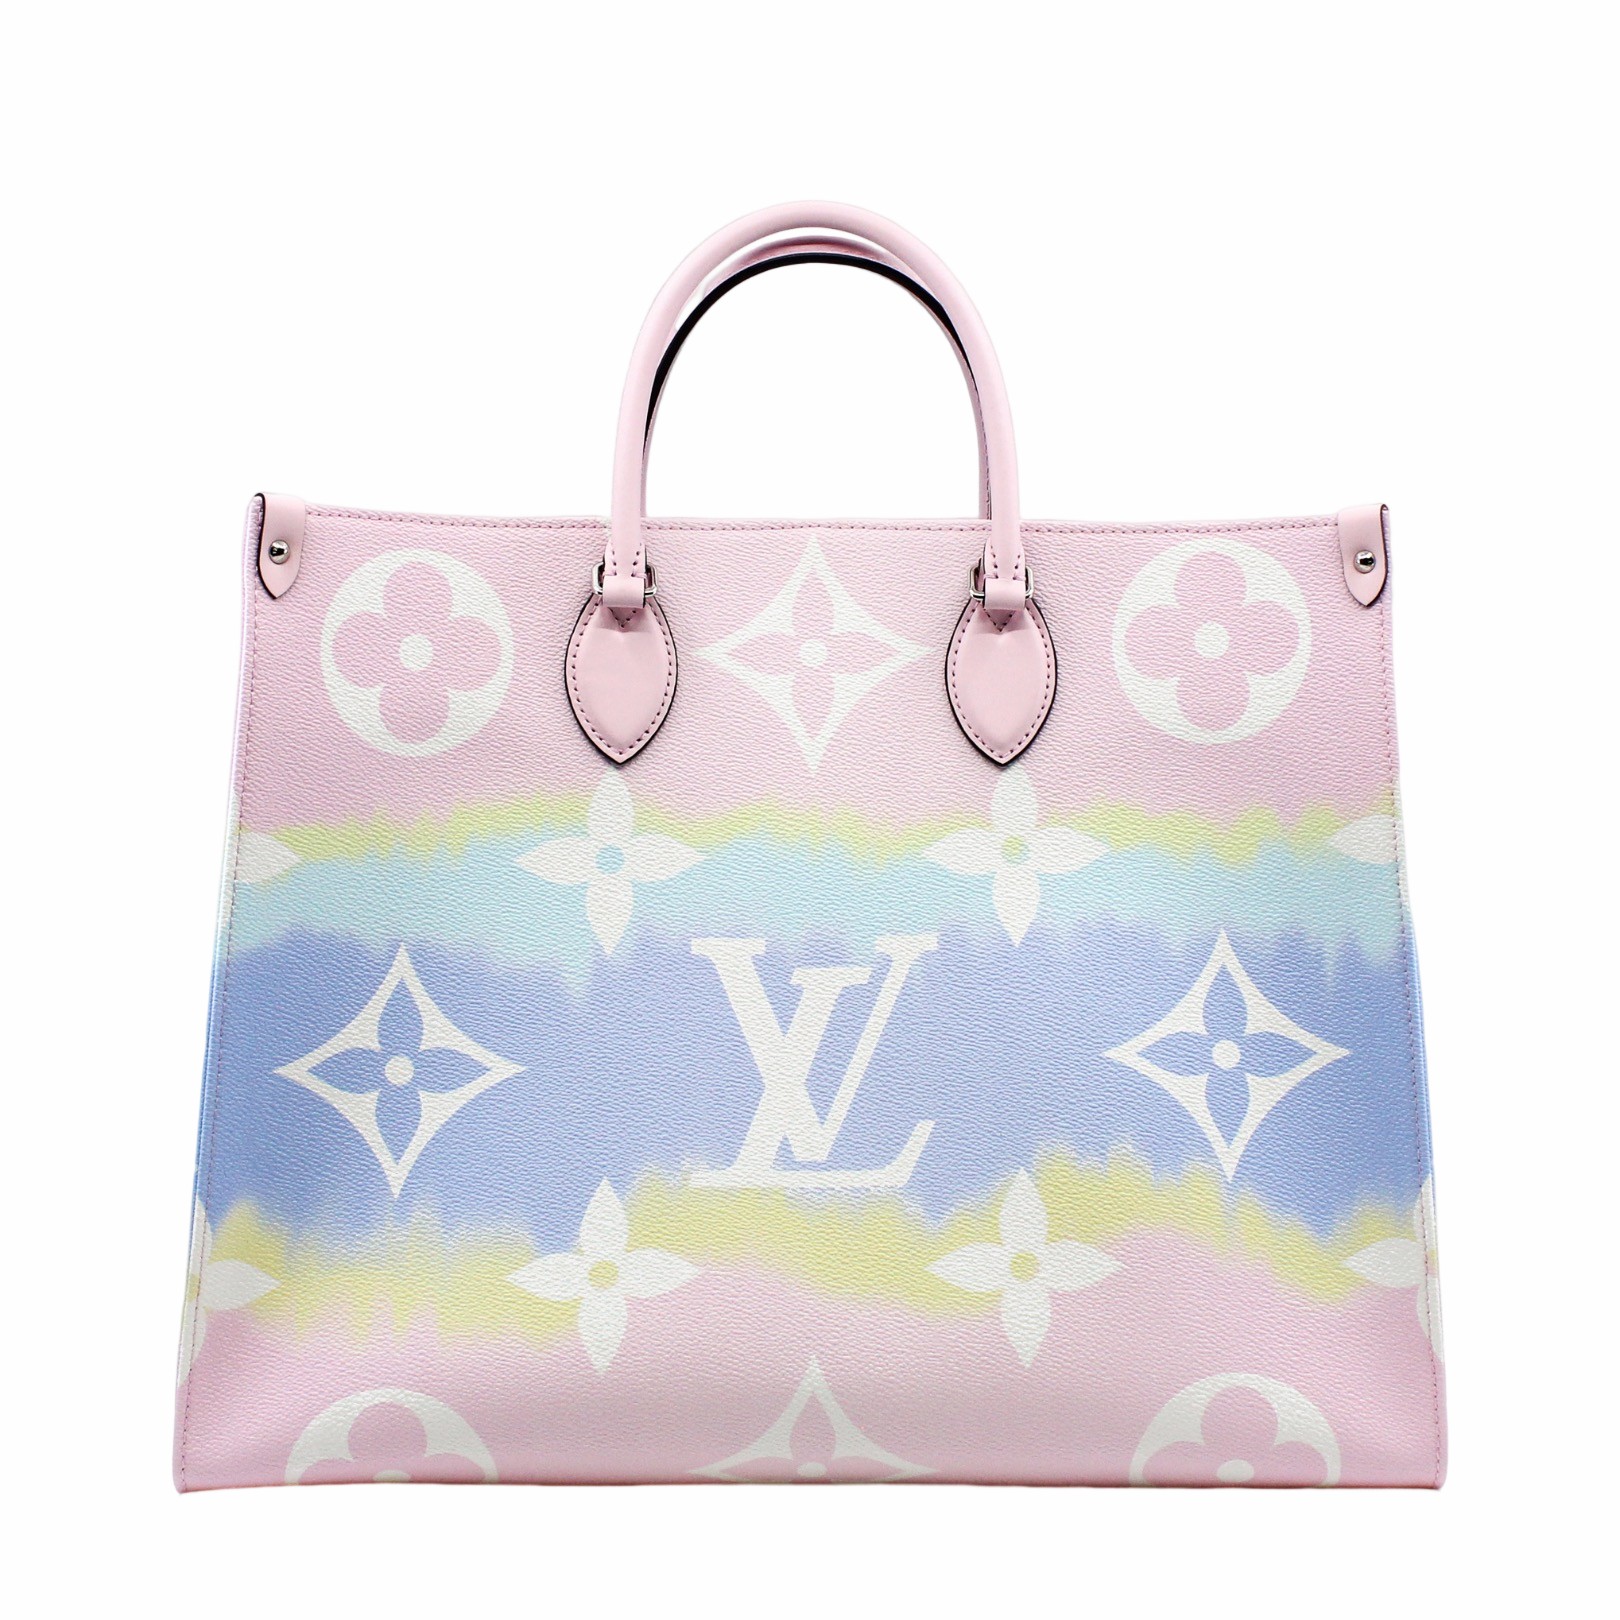  Louis Vuitton, Pre-Loved Multicolor Calfskin Leather Trapeze Bag,  Multi : Luxury Stores